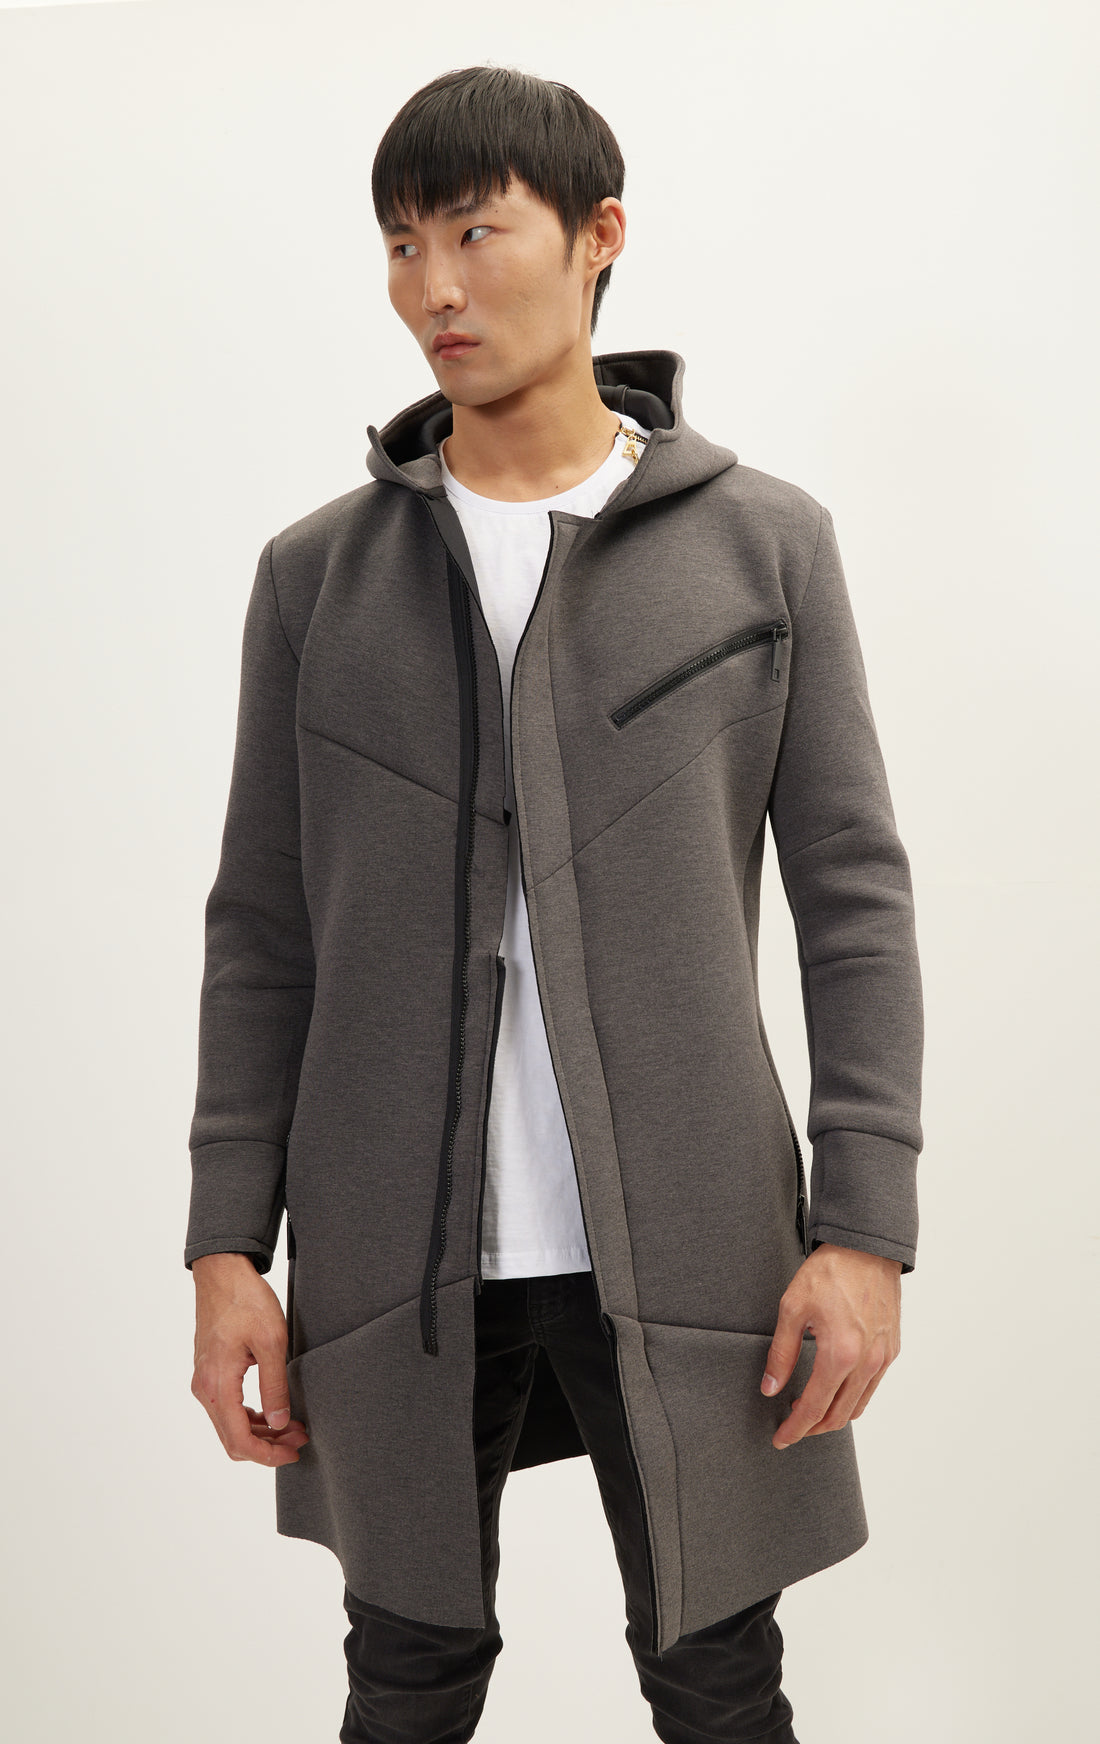 N° 6357 LINEAR HOODED LONG KNIT ZIPPER JACKET - ANTHRACITE